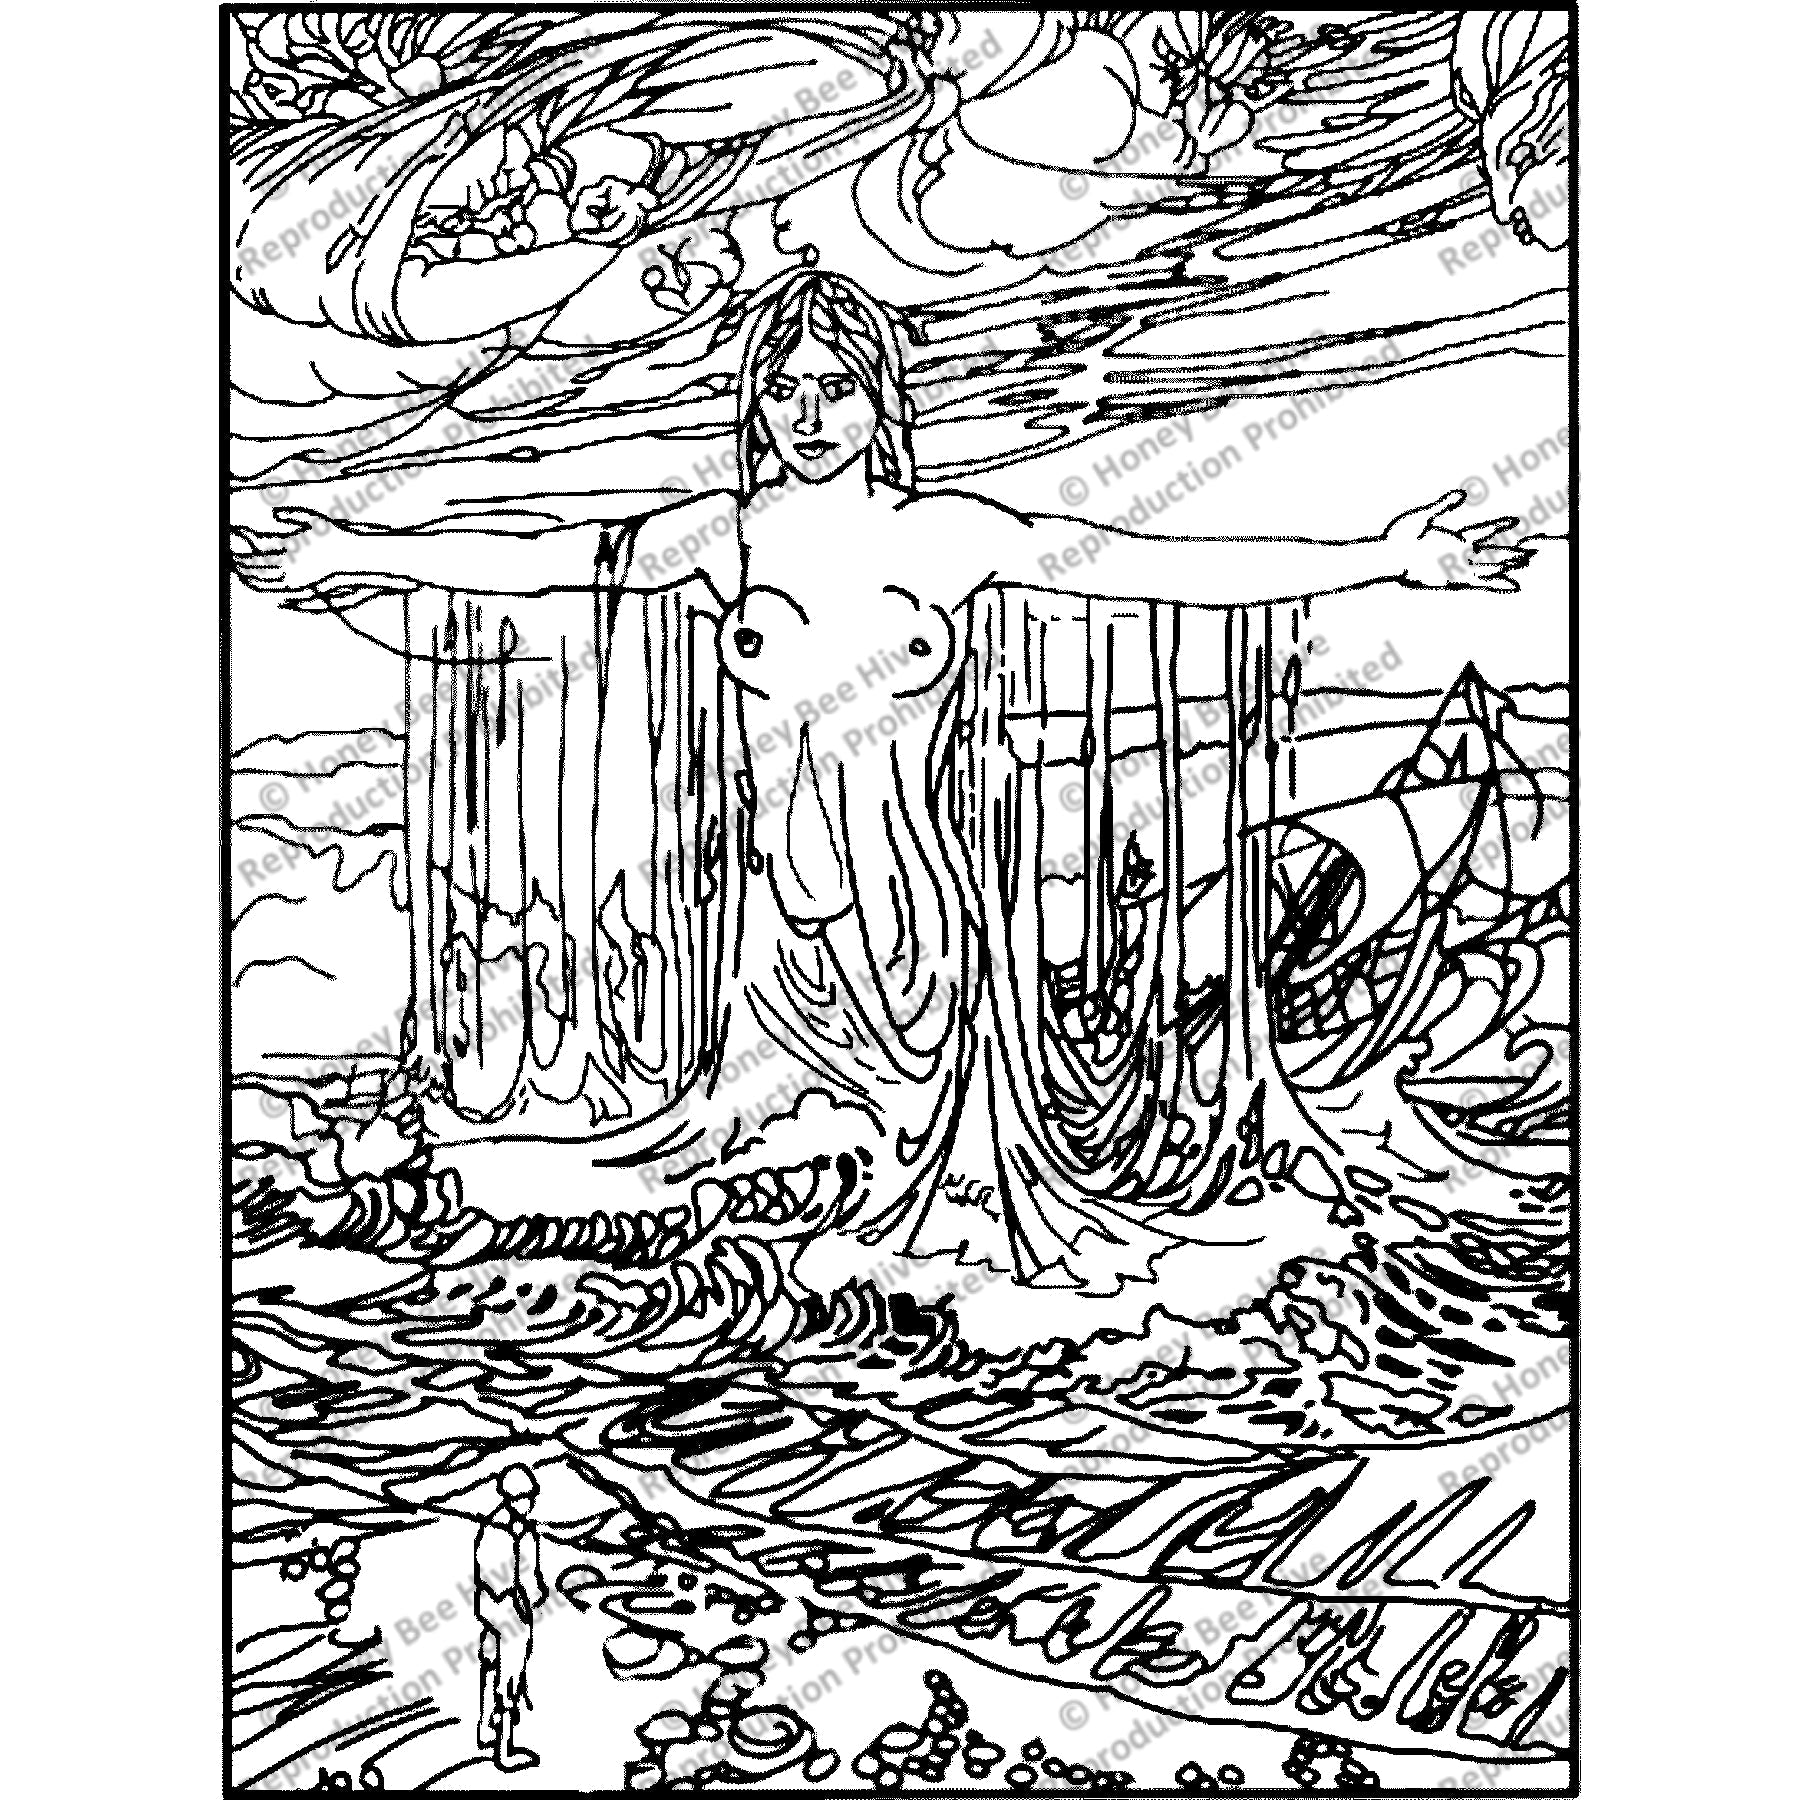 The Shipwrecked Man and the Sea, ill. Arthur Rackham, 1913, rug hooking pattern